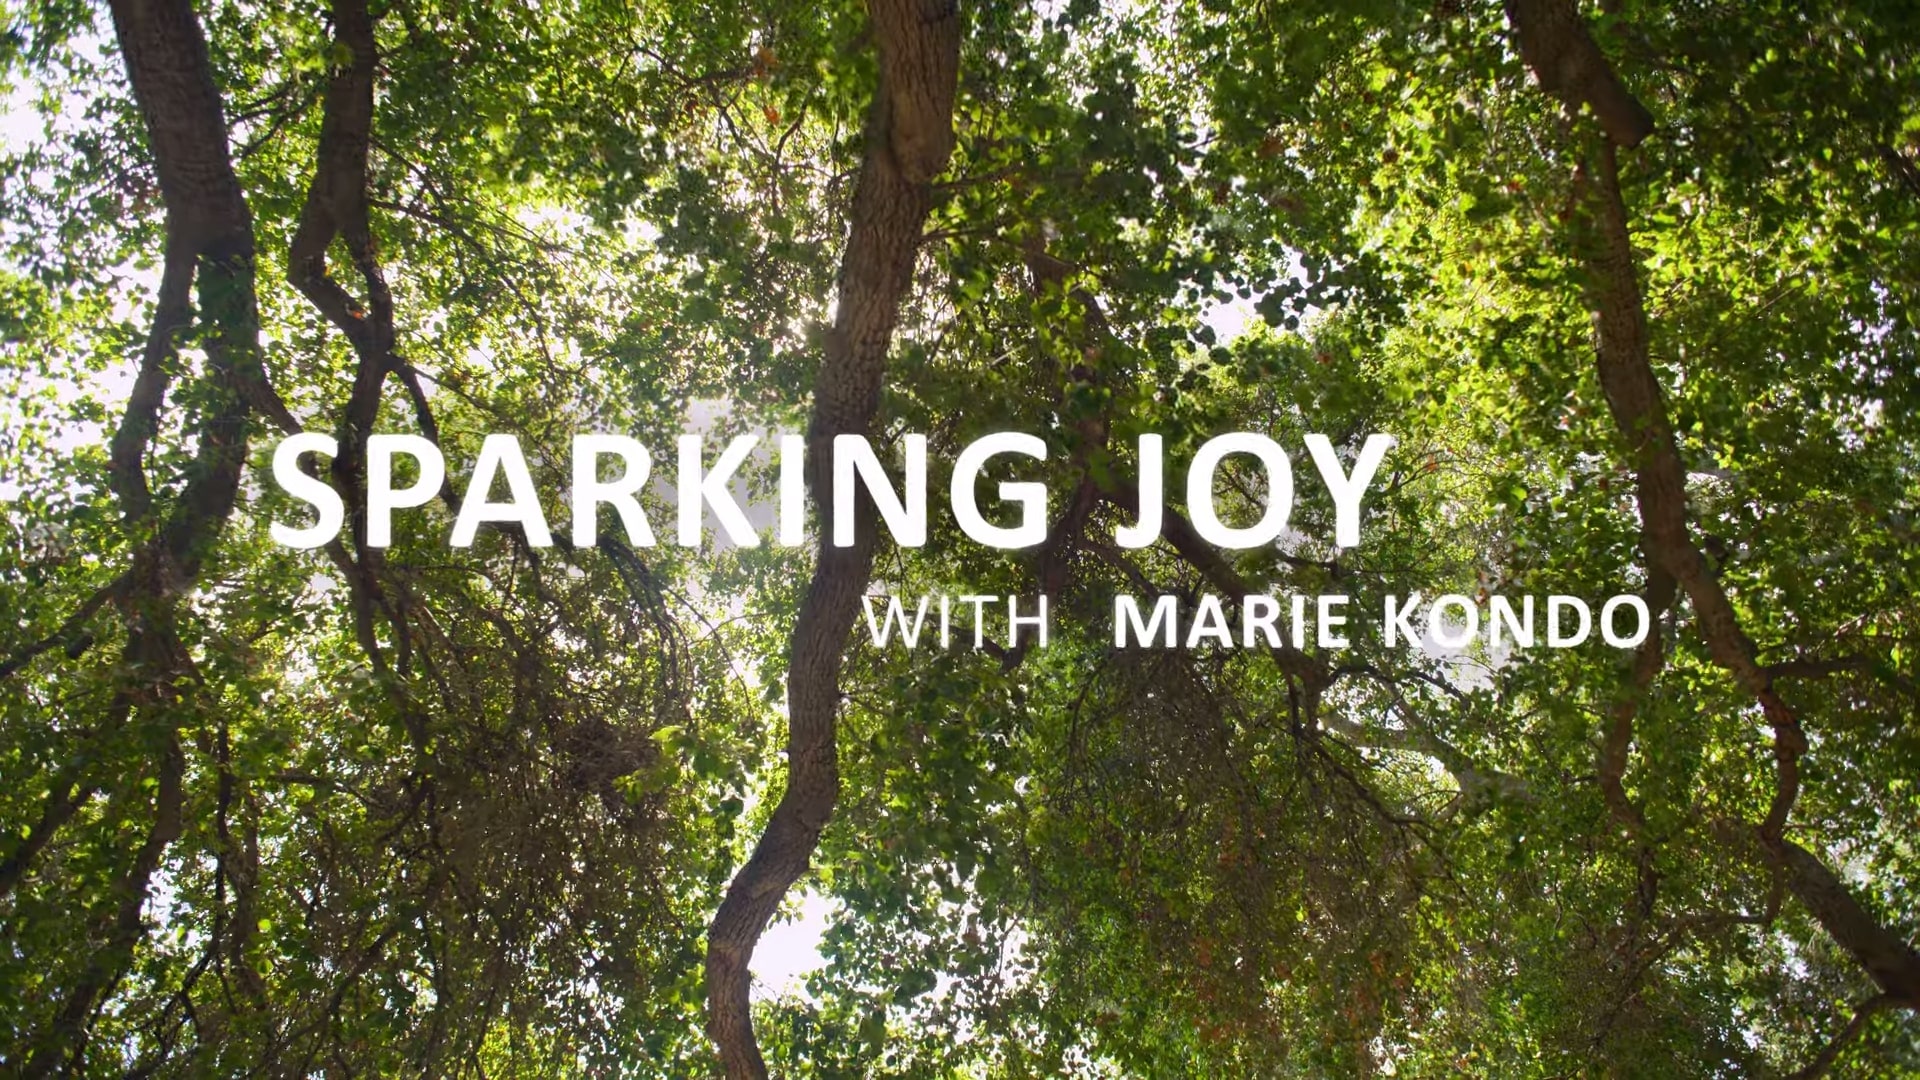 Sparking Joy with Marie Kondo Trailer, Coming to Netflix in September 2021